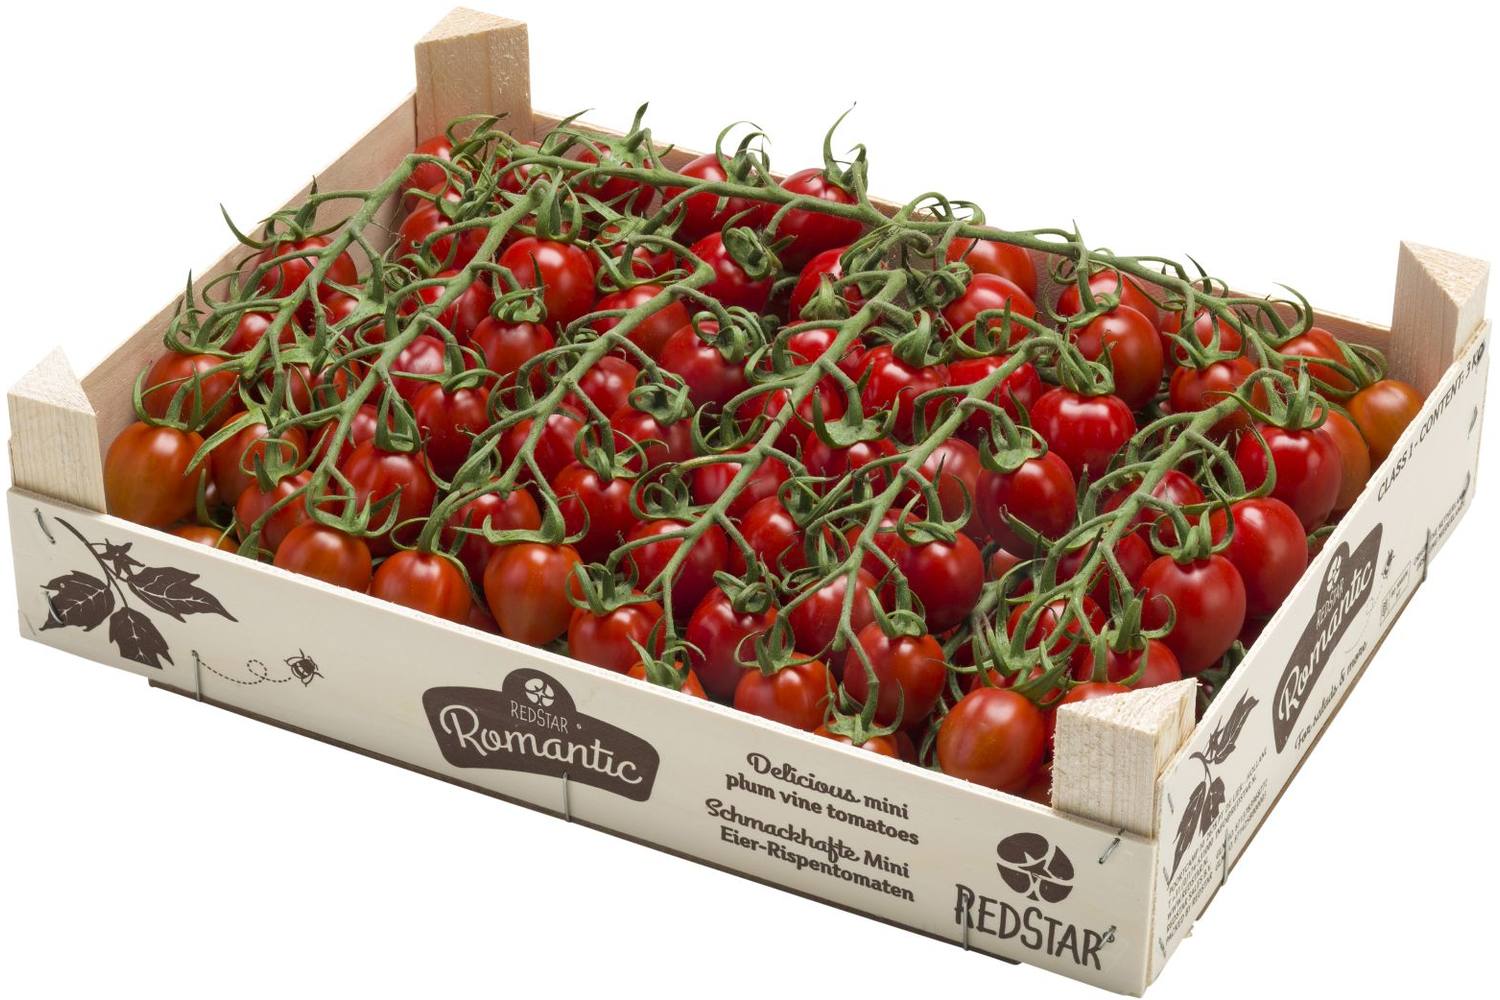 Tomates Red Star Romantic caisse 3kg 1